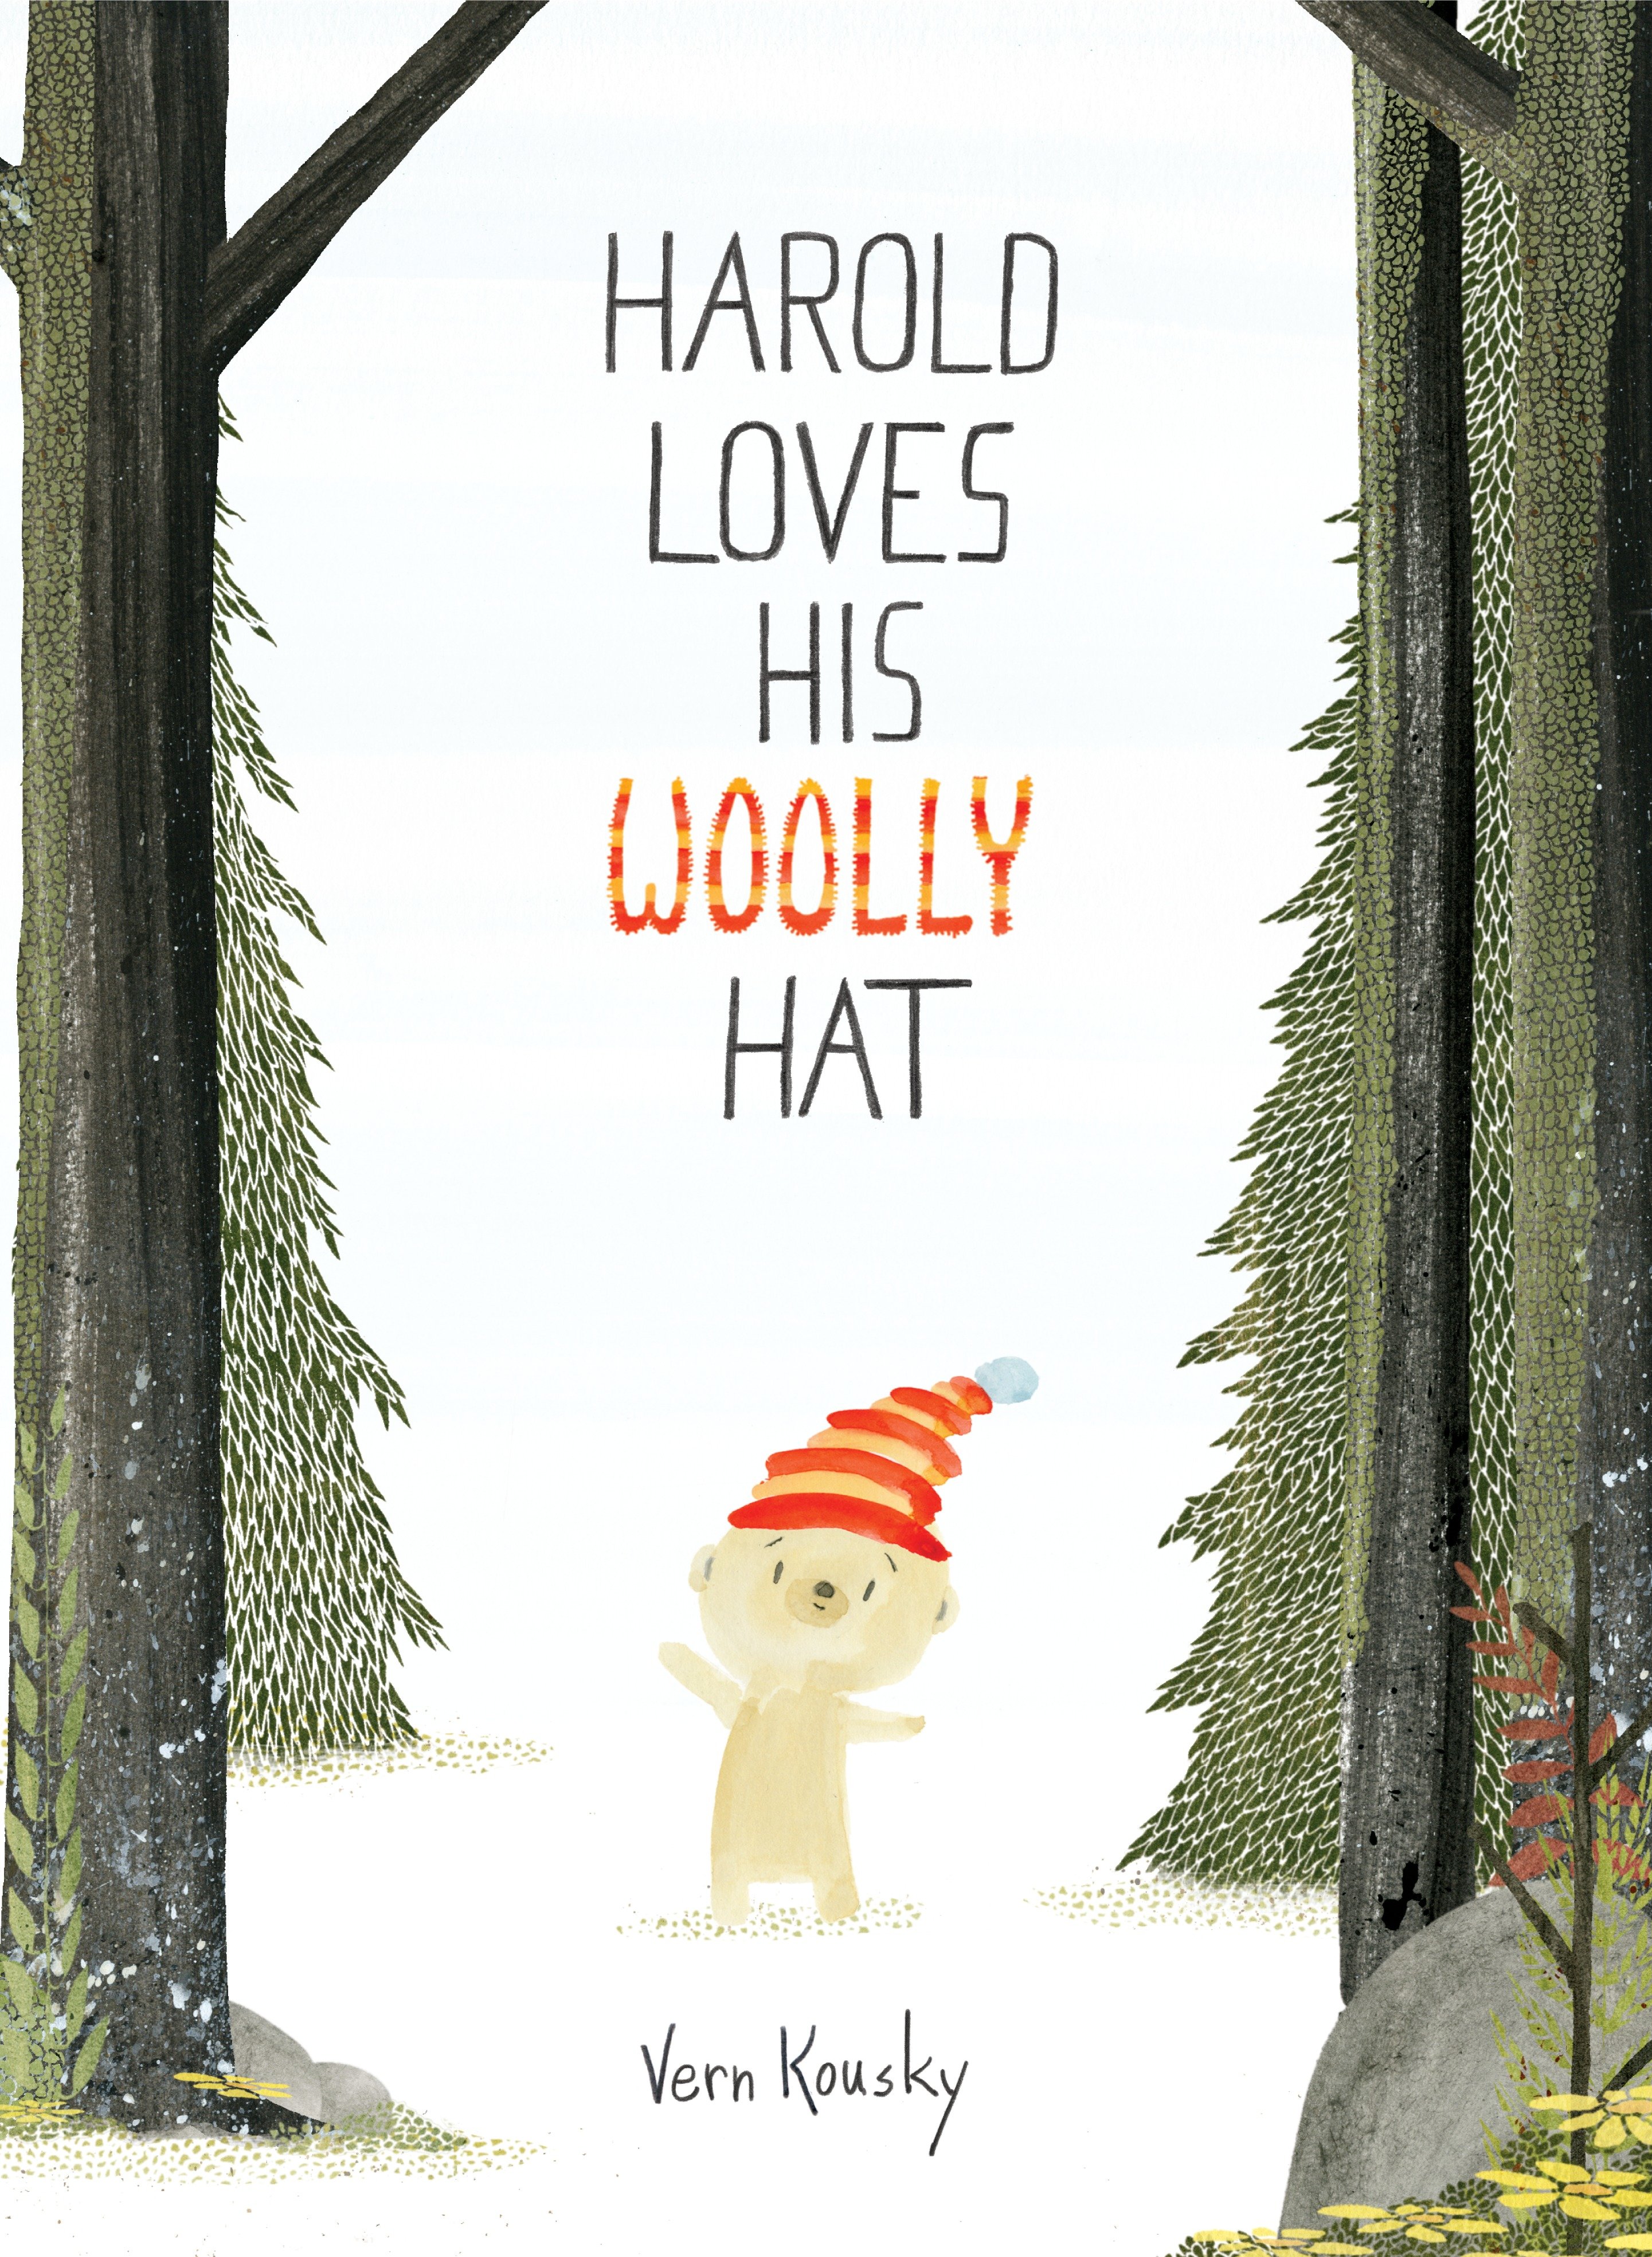 Harold Loves His Woolly Hat (Hardcover Book)